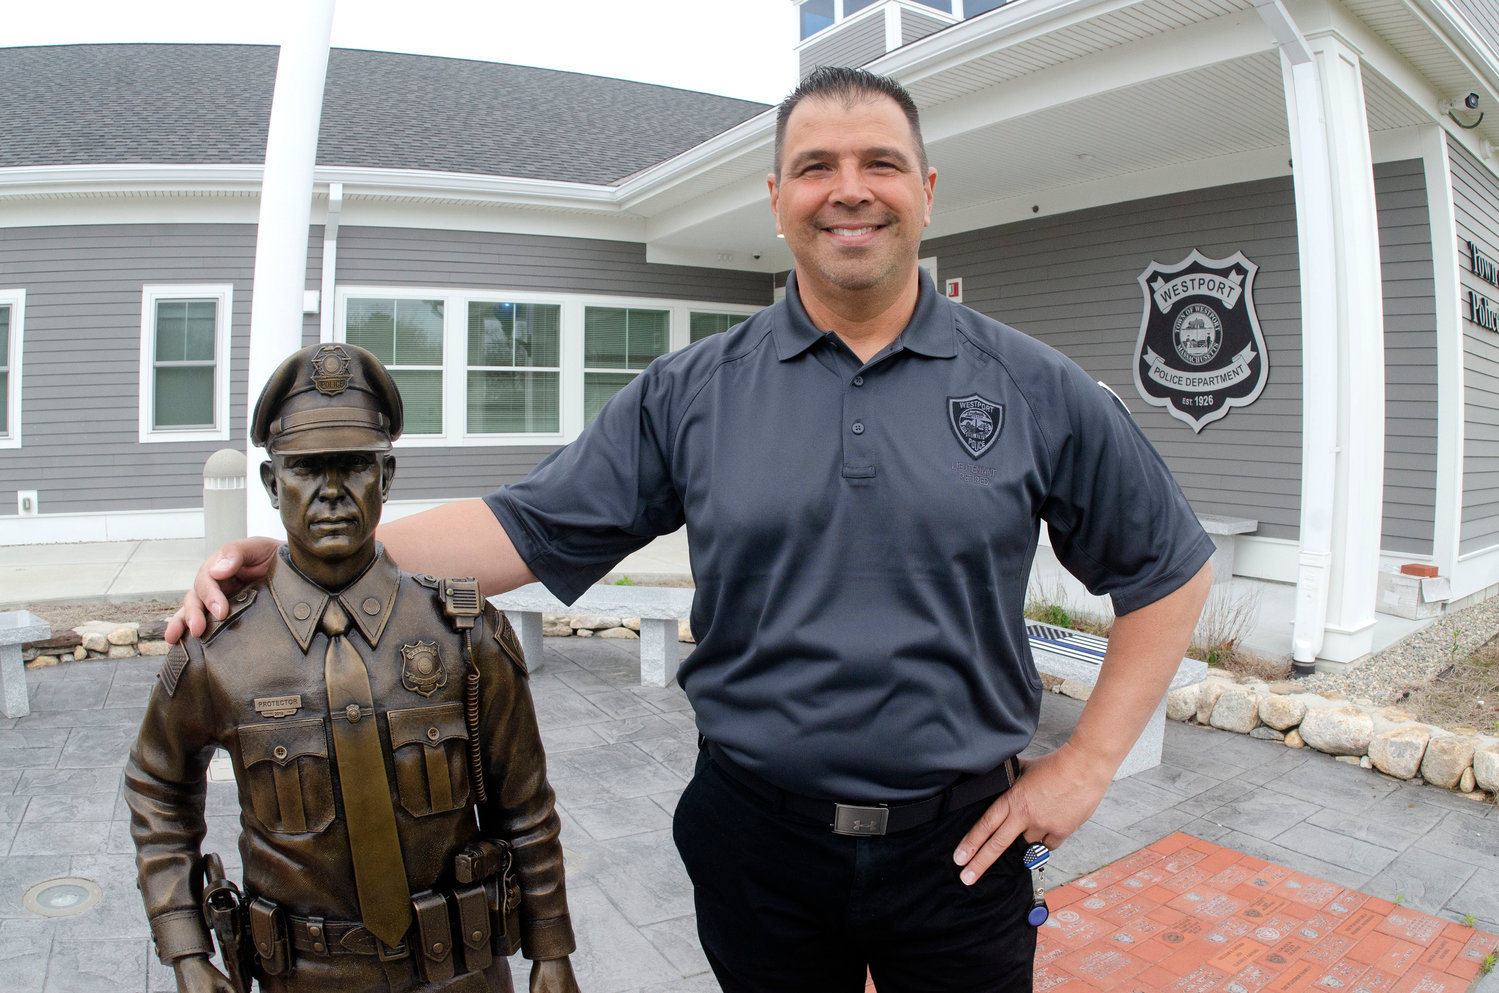 Lt. Thomas Plourde, who was instrumental in the placing of the bronze police officer outside the new police headquarters, has all but retired from the force.